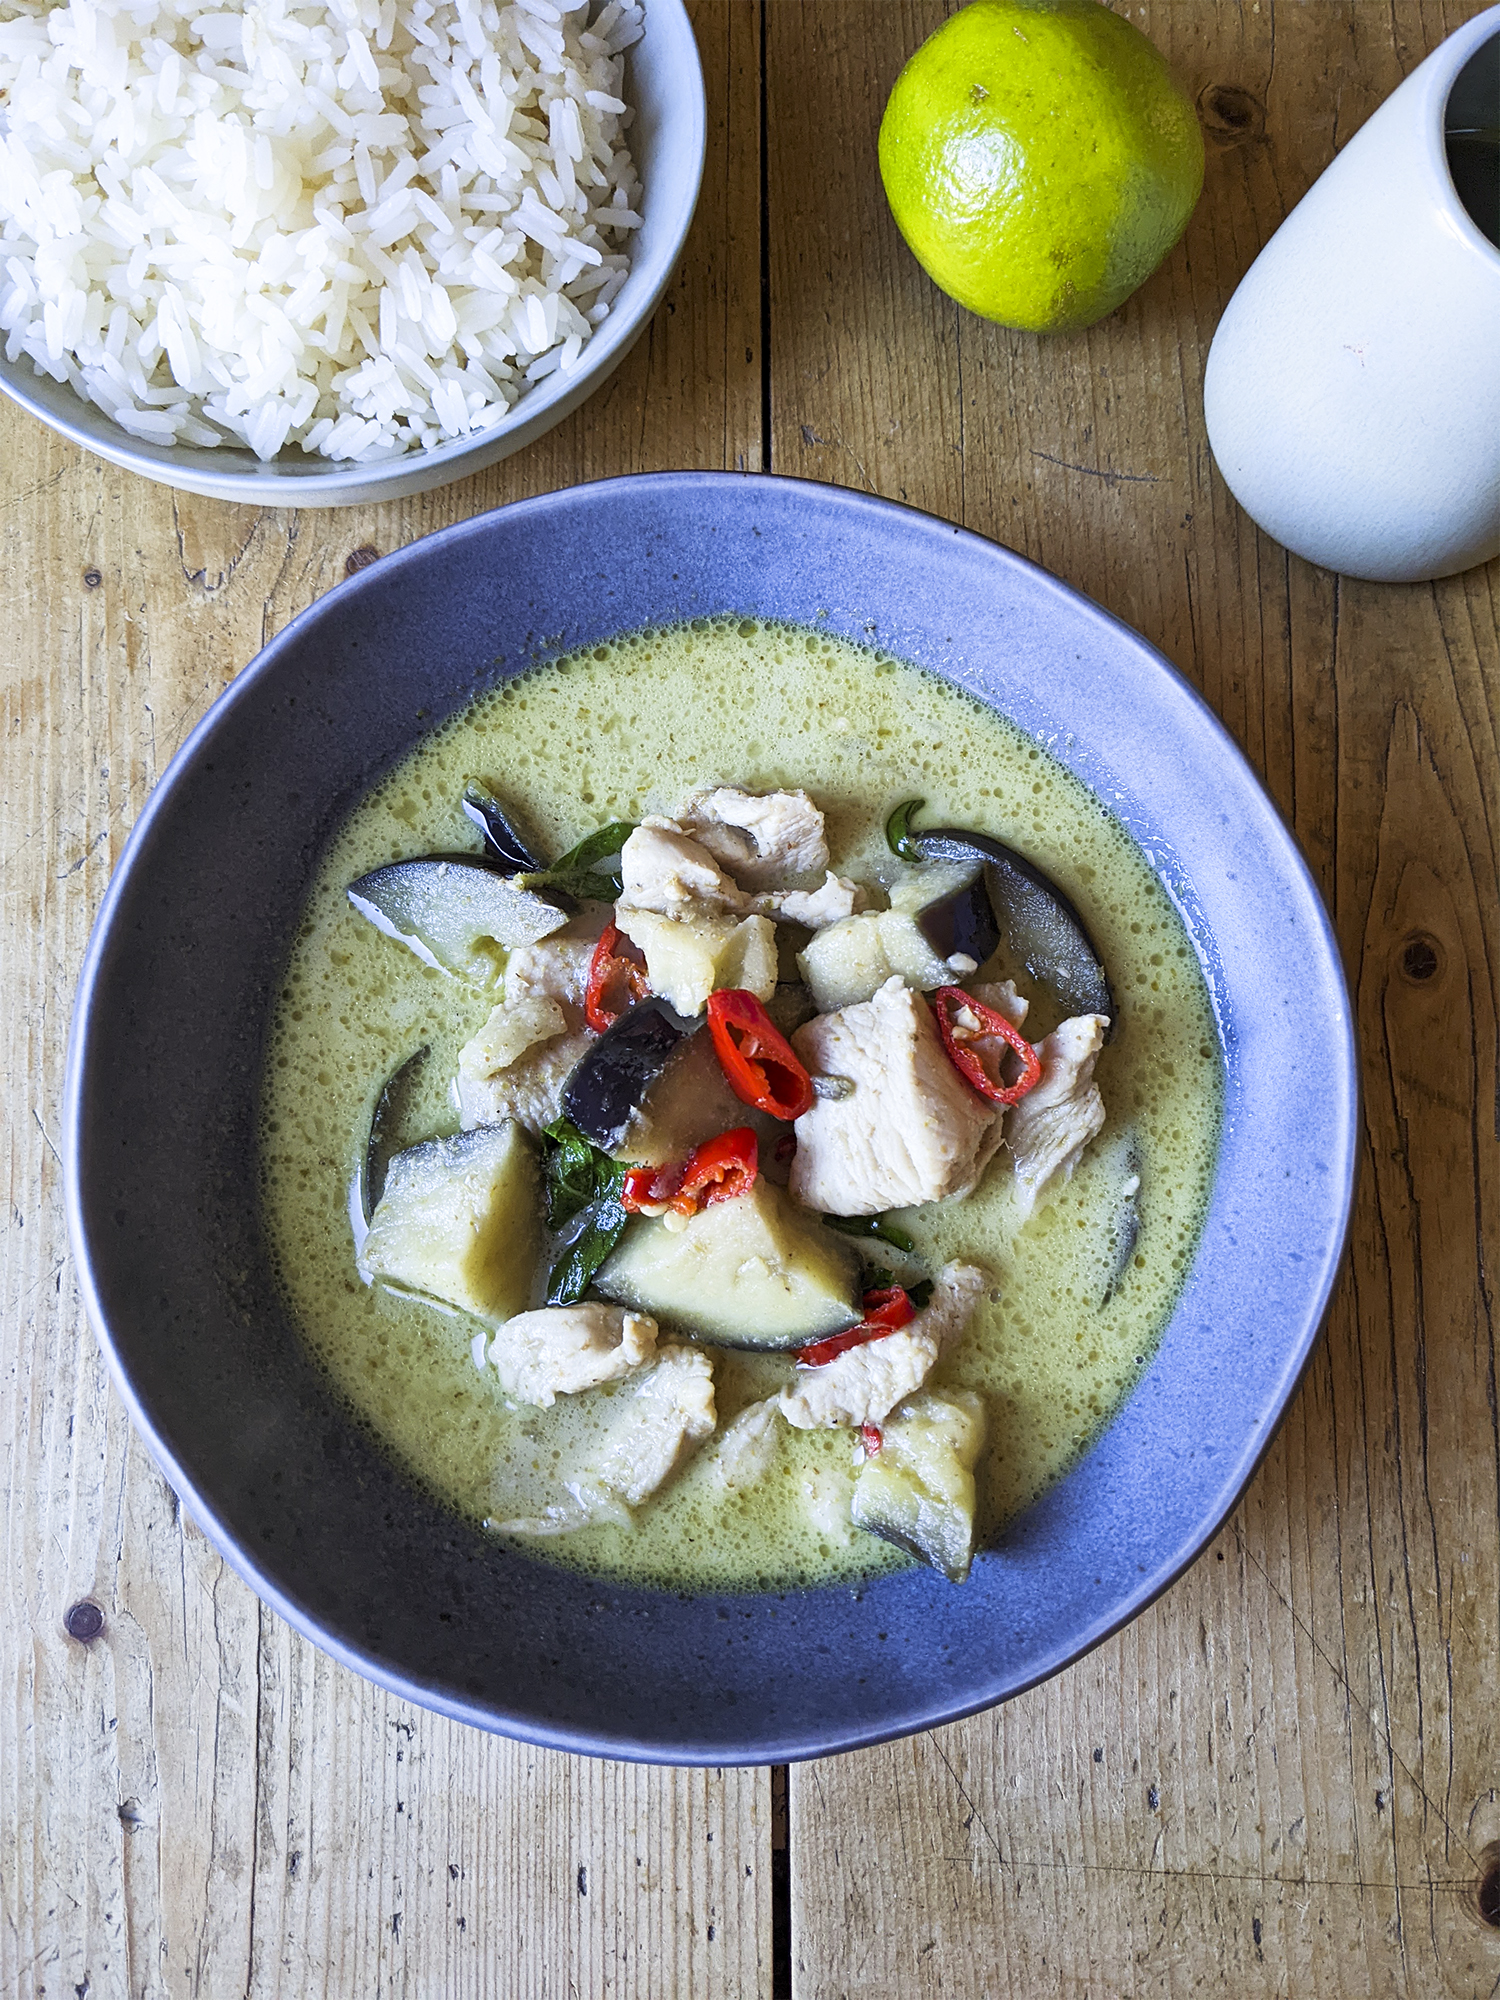 A basic authentic green Thai curry with chicken, aubergine, lime, Thai basil and red chilli + a small bowl of rice on the side. Served in Tiger ceramic blue bowl.